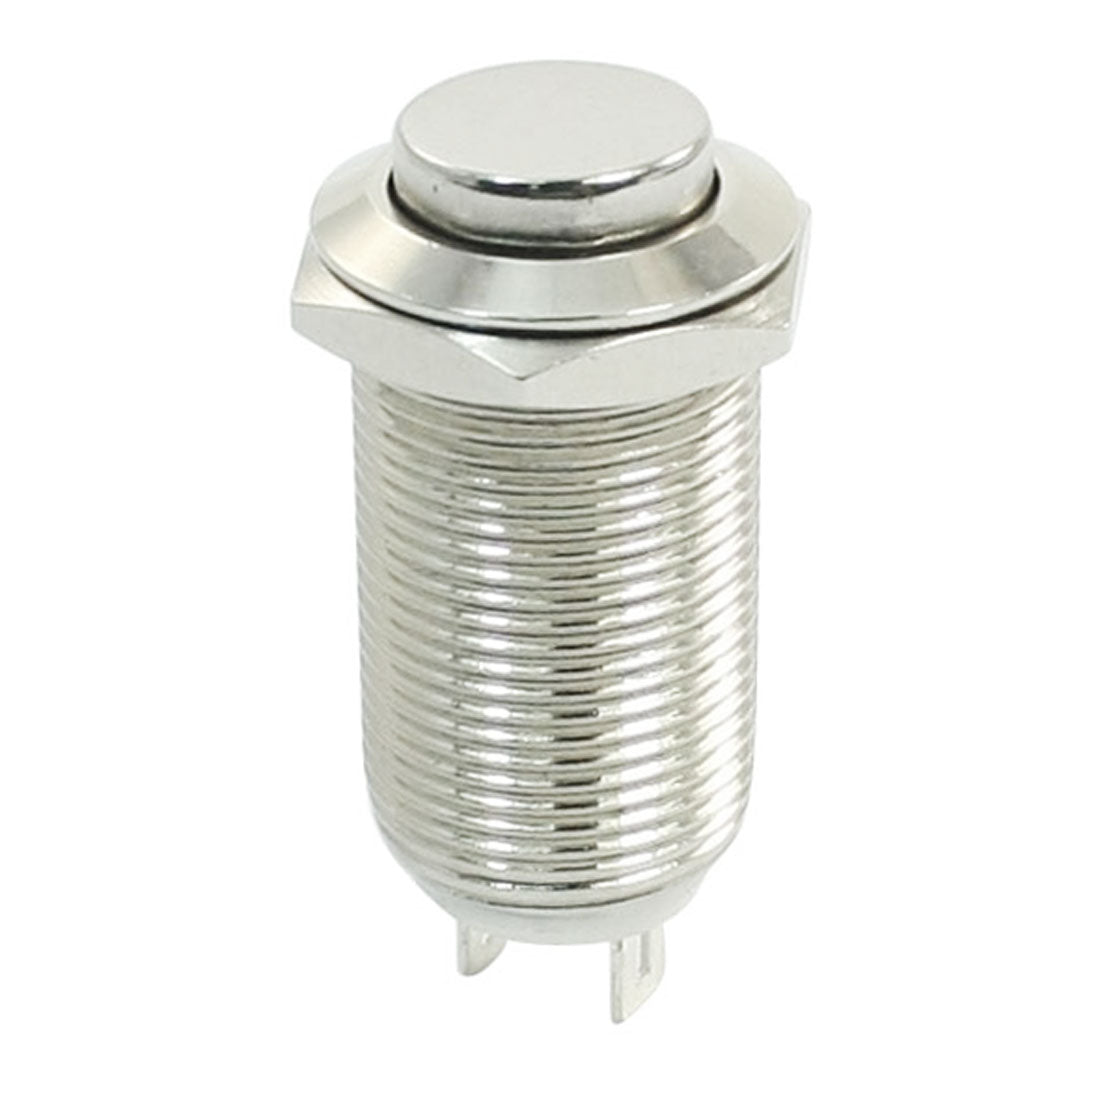 uxcell Uxcell Metal Latching High Flat Push Button Switch 12mm Threaded SPST ON/OFF 29 x 14mm